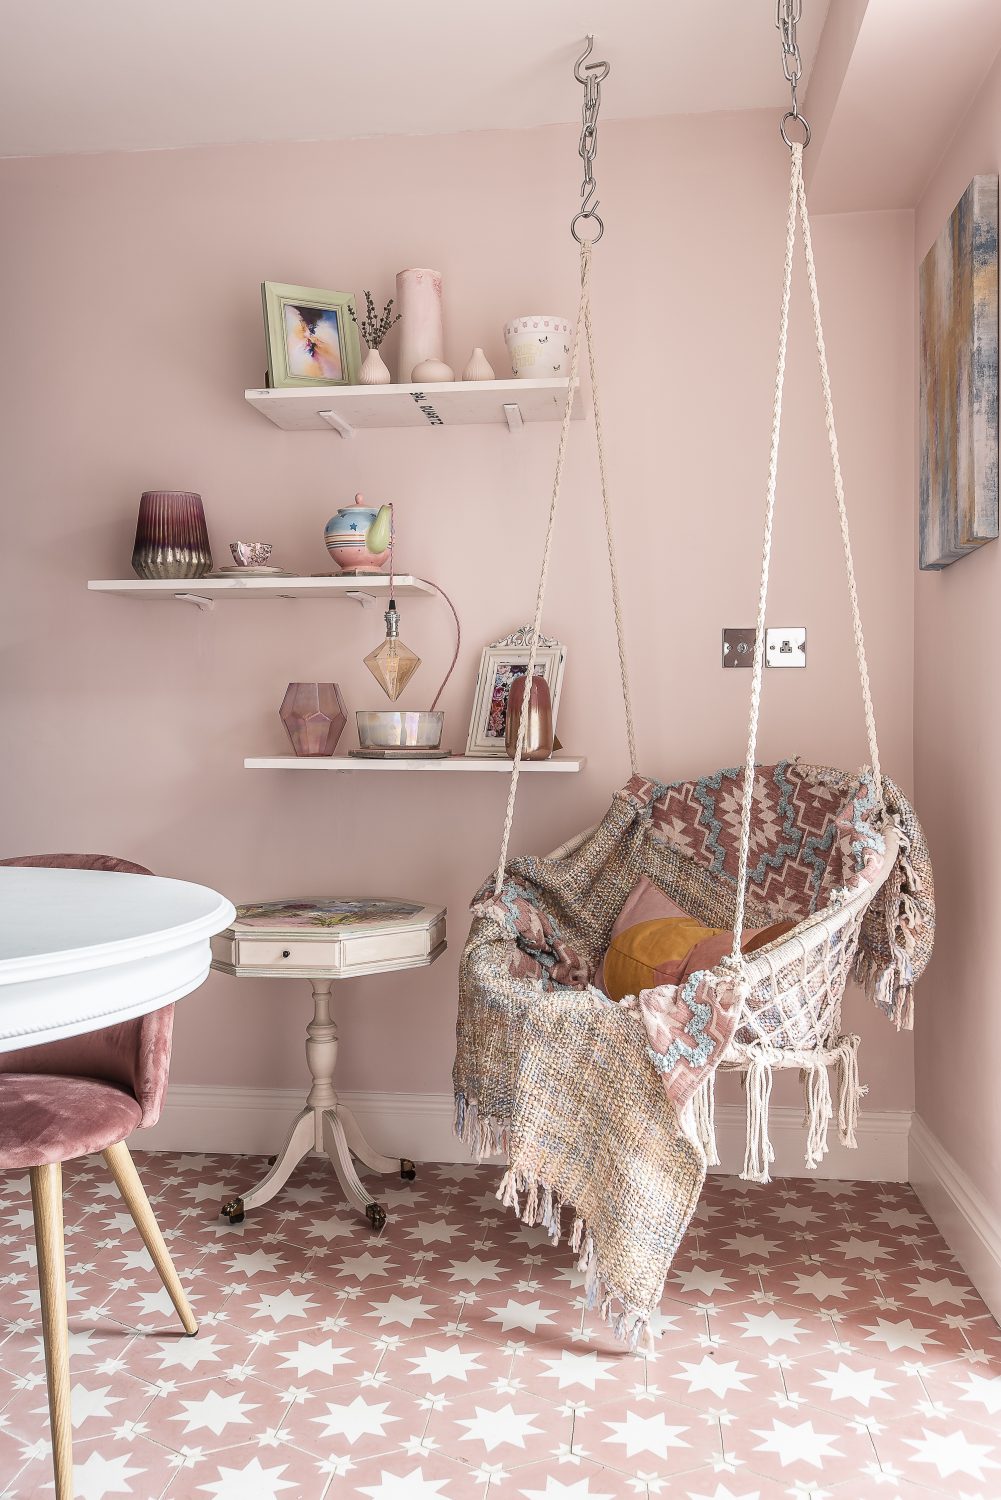 A cosy macrame-style swinging chair is adorned with blankets and suspended from the ceiling in the dining room